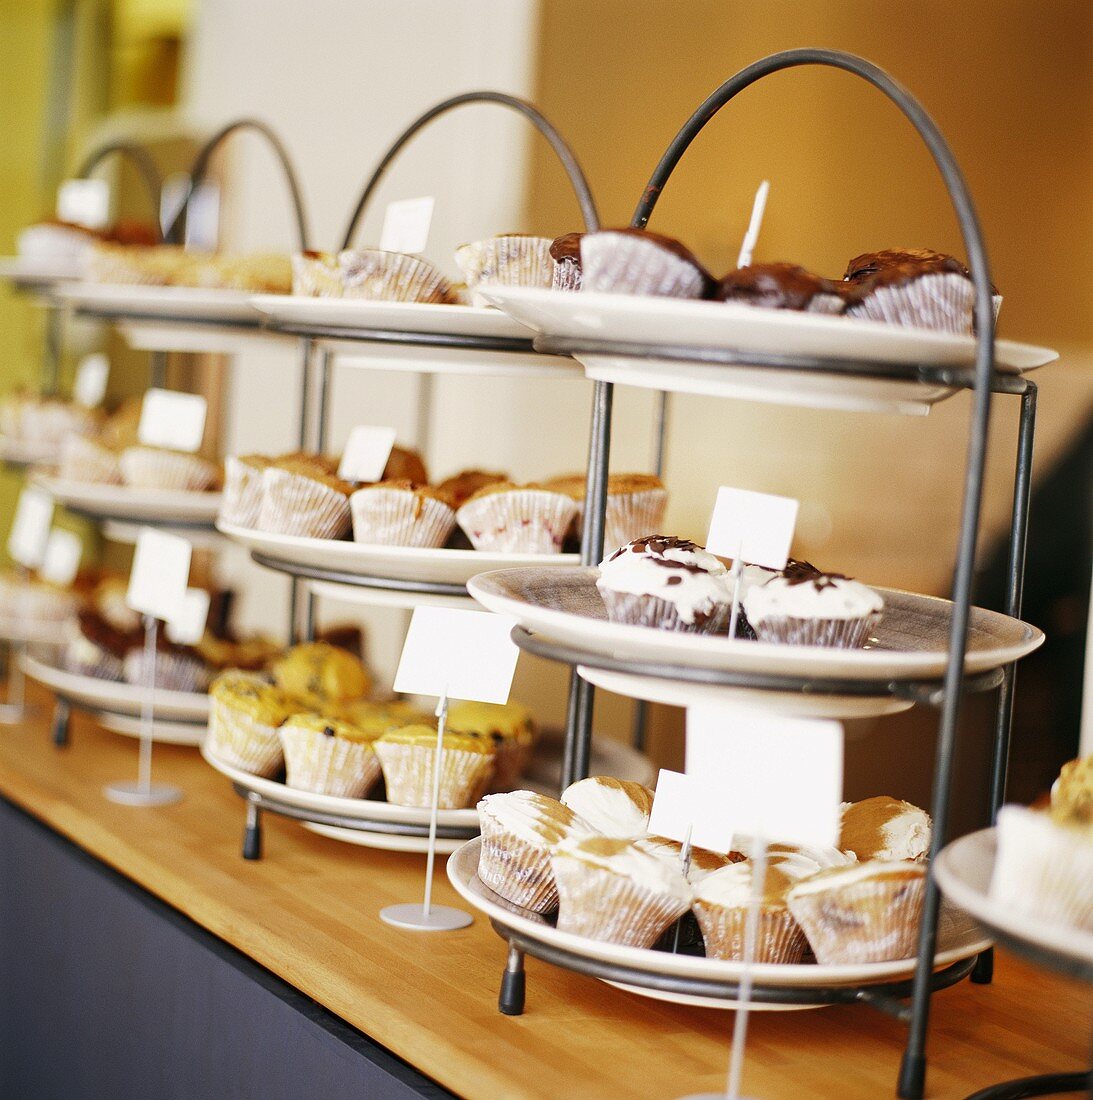 Muffins on tiered stands